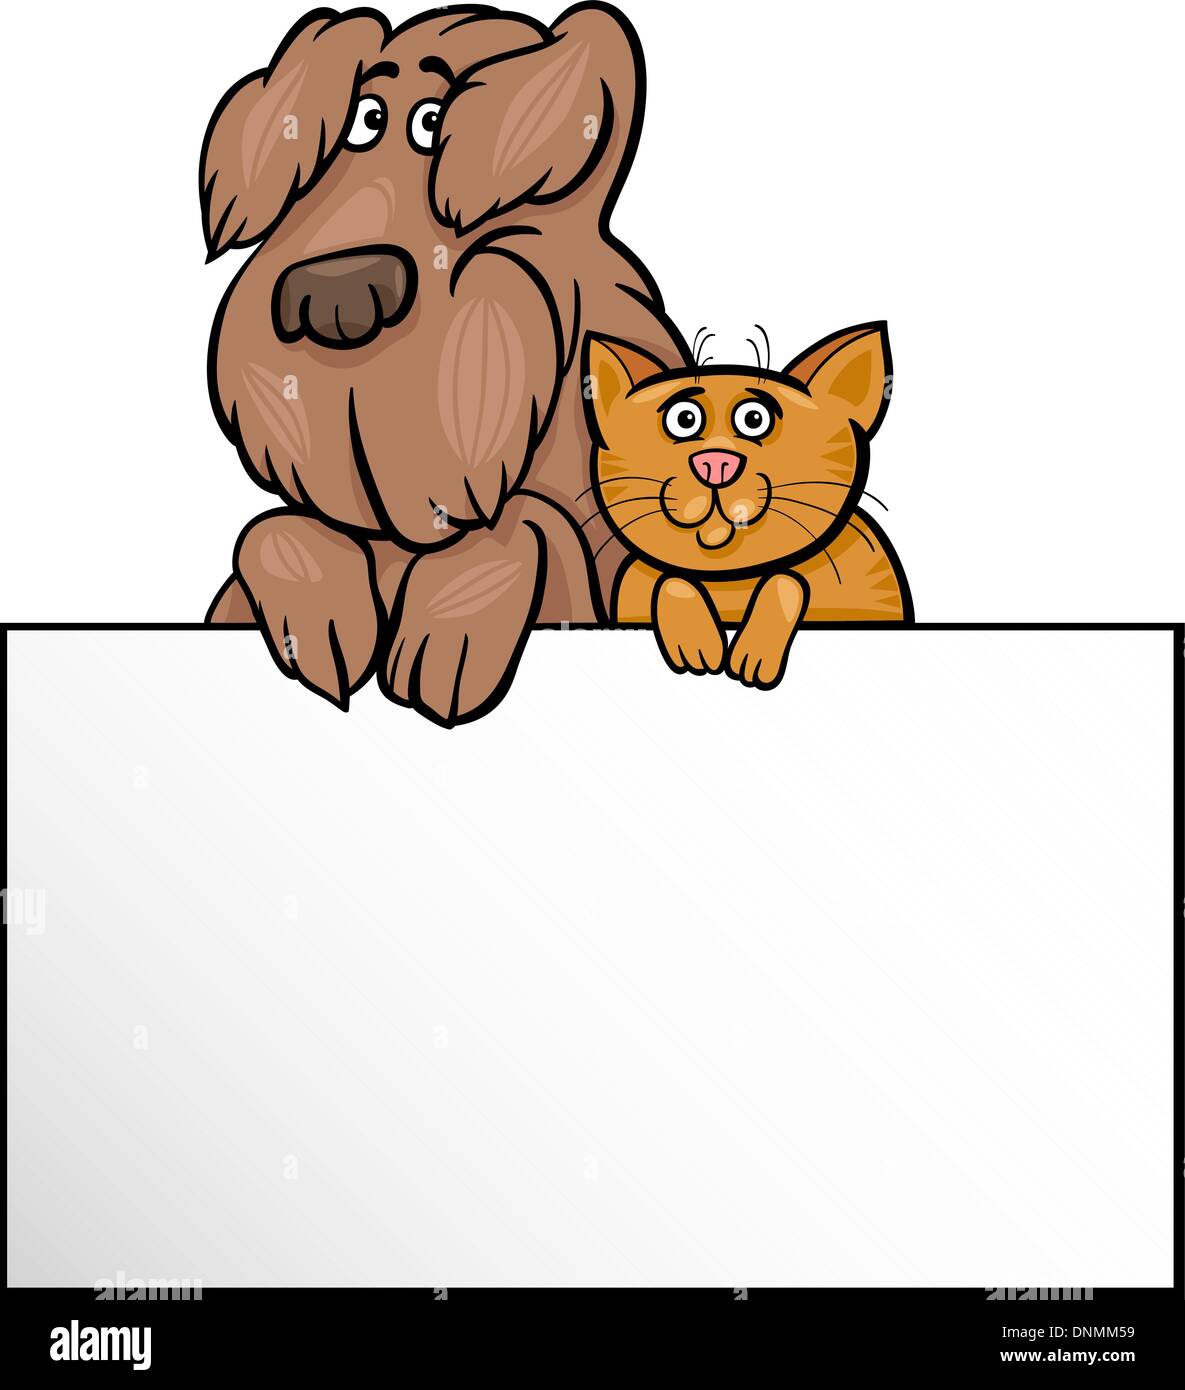 Cartoon Illustration of Cute Shaggy Dog and Cat with White Card or Board Greeting or Business Card Design Stock Vector